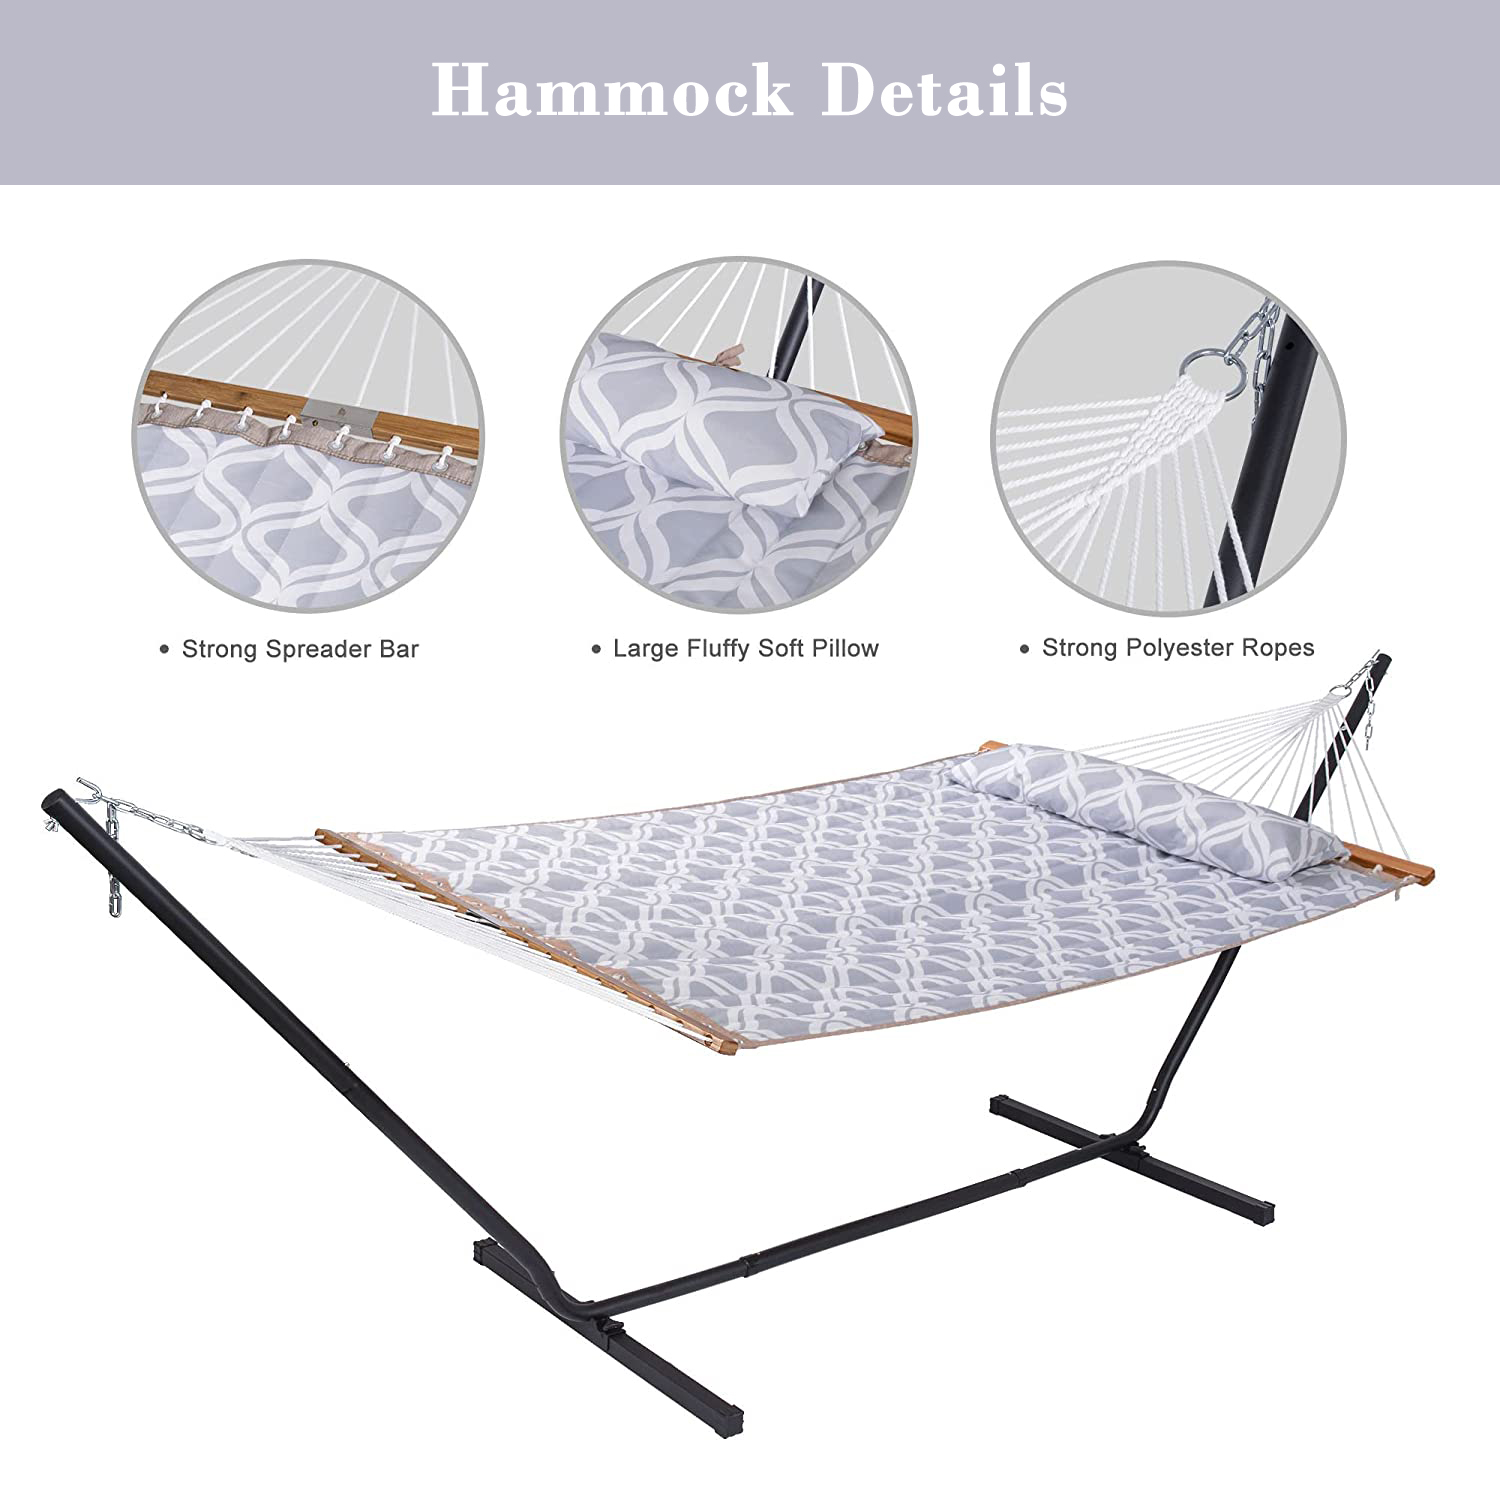 SUNCREAT 2-in-1 Convertible Hammock Chair with Stand Included, Outdoor Hammock Swing Chair with Stand, Patent Pending, Blue Stripe